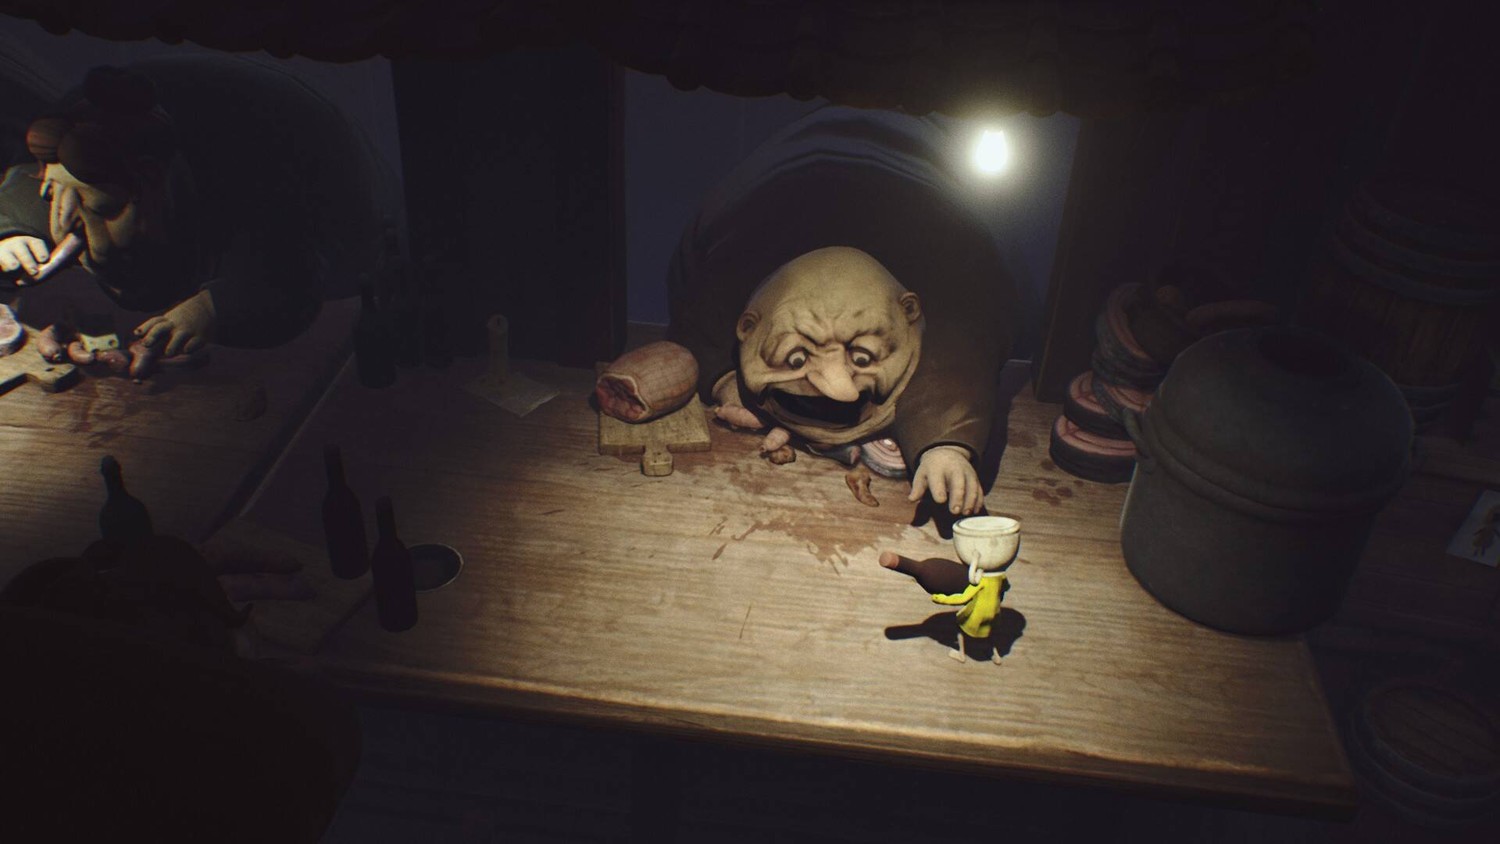 Little Nightmares (Complete) v1.0.43.1 DRM-Free Download - Free